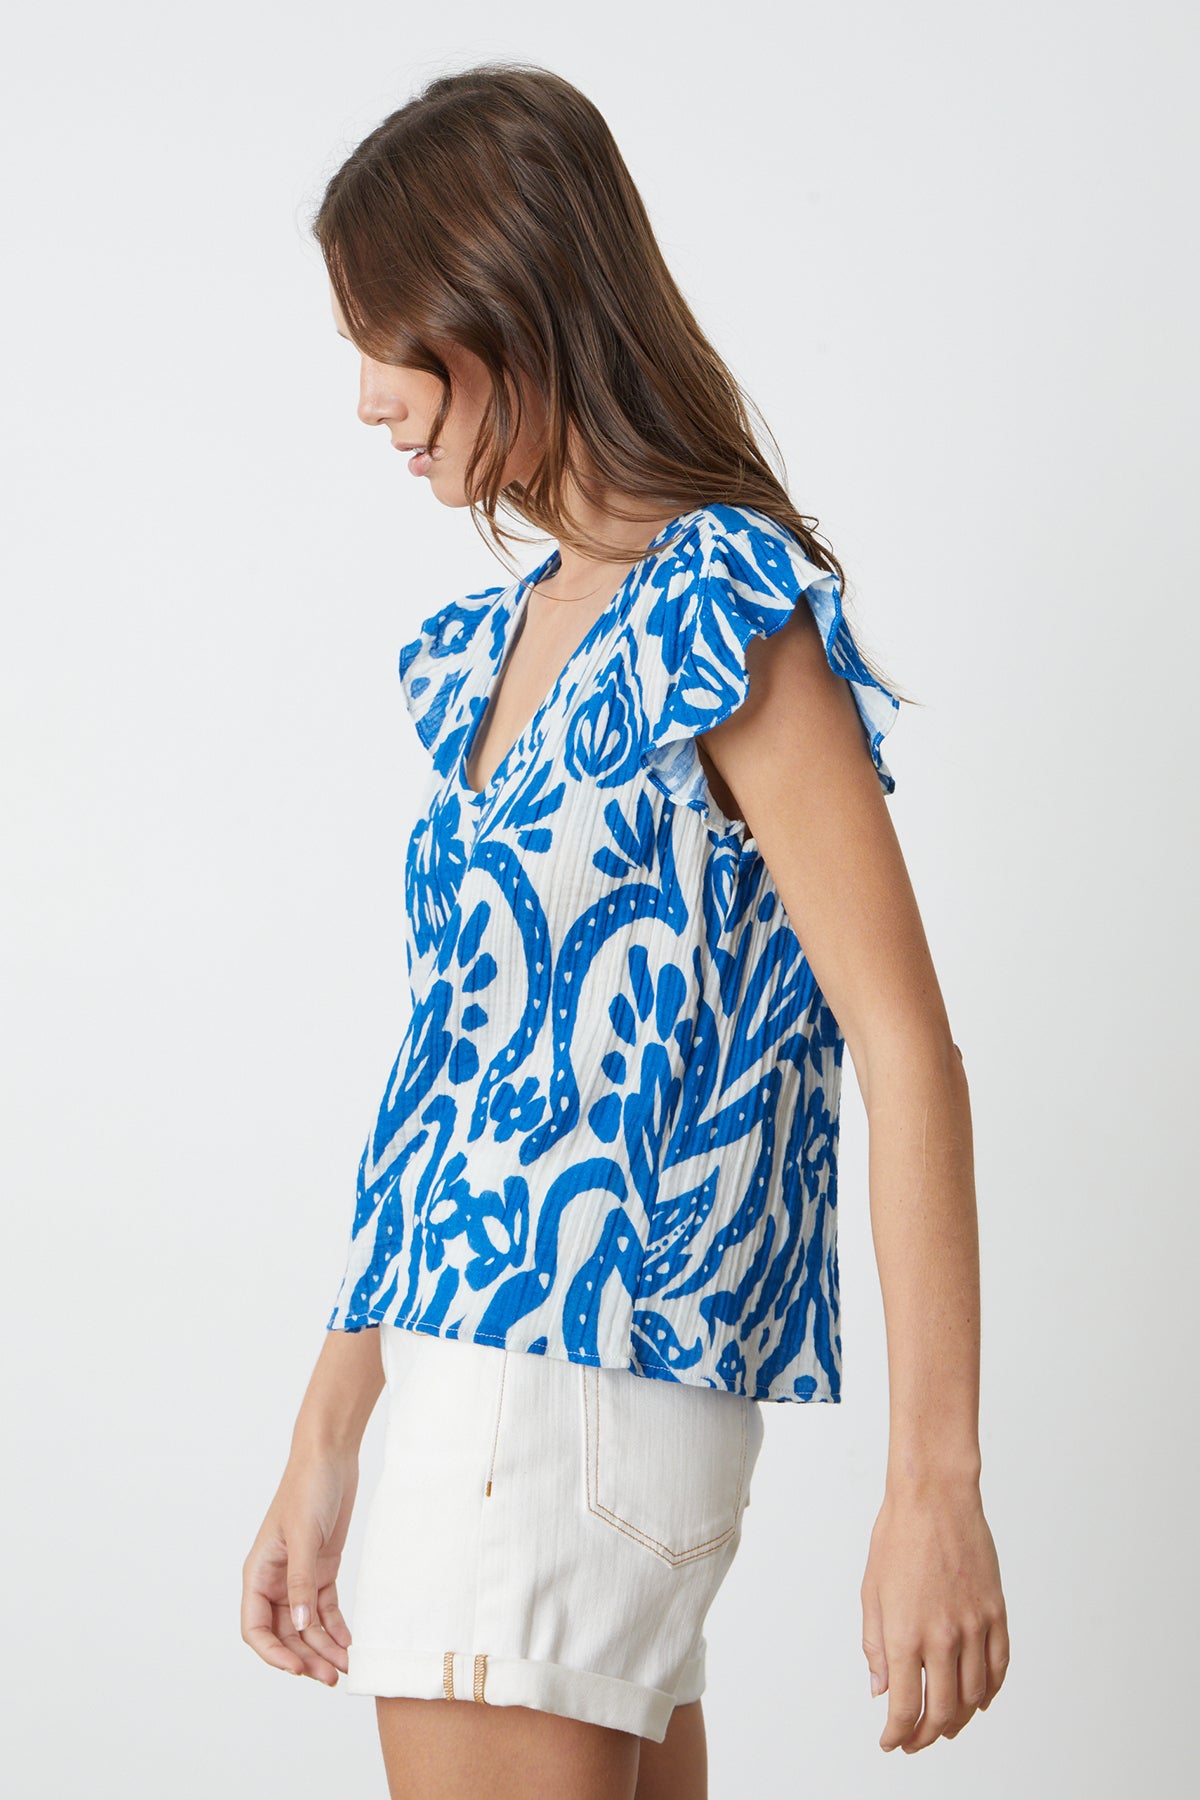   The model is wearing an ALEAH PRINTED COTTON GAUZE top by Velvet by Graham & Spencer. 